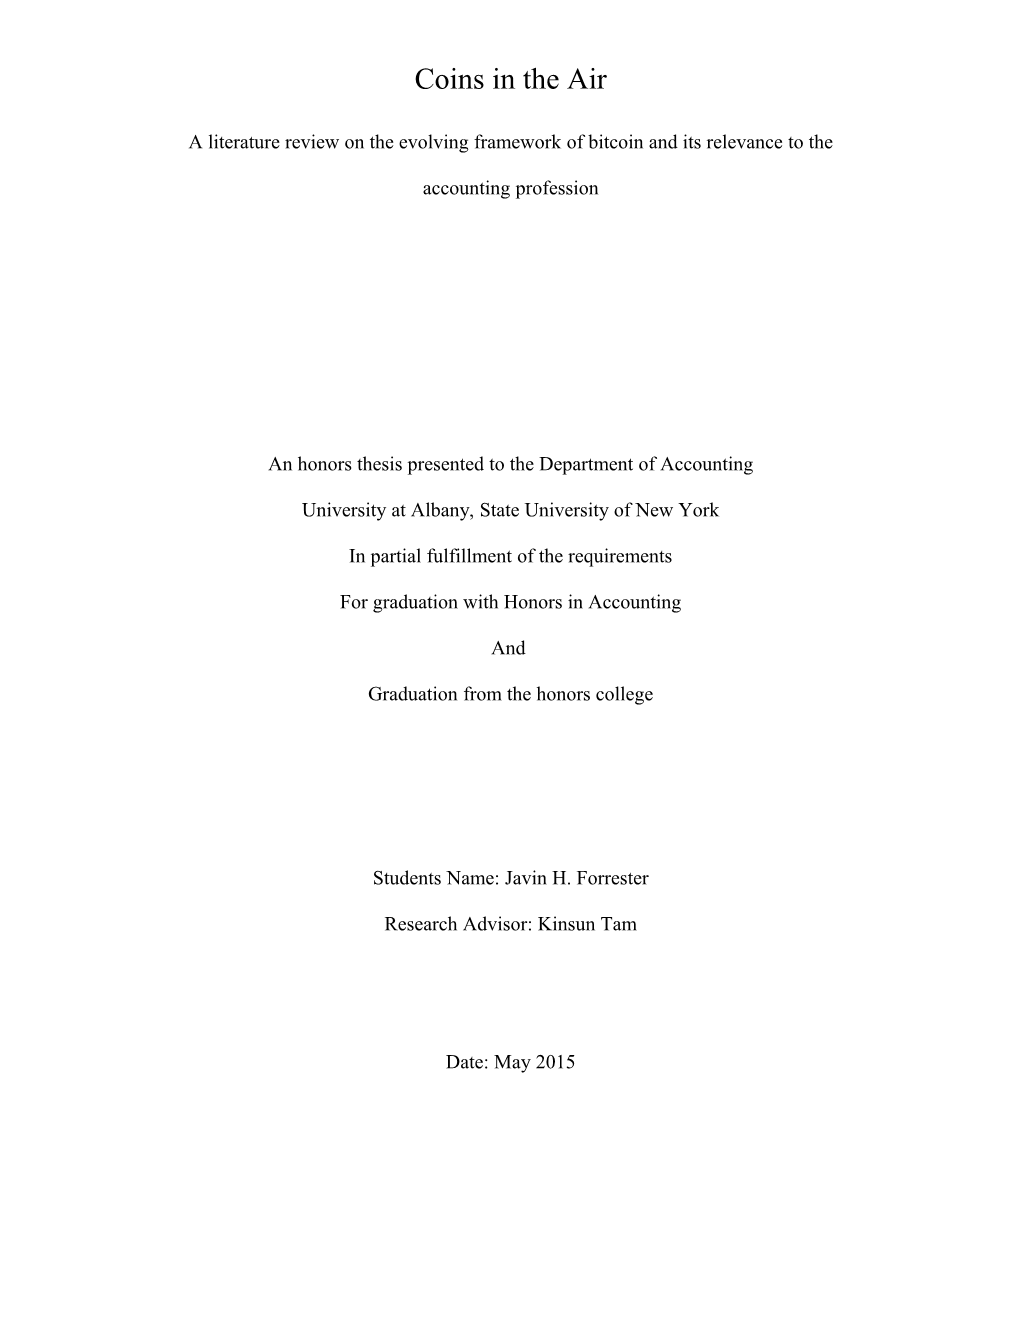 An Honors Thesis Presented to the Department of Accounting